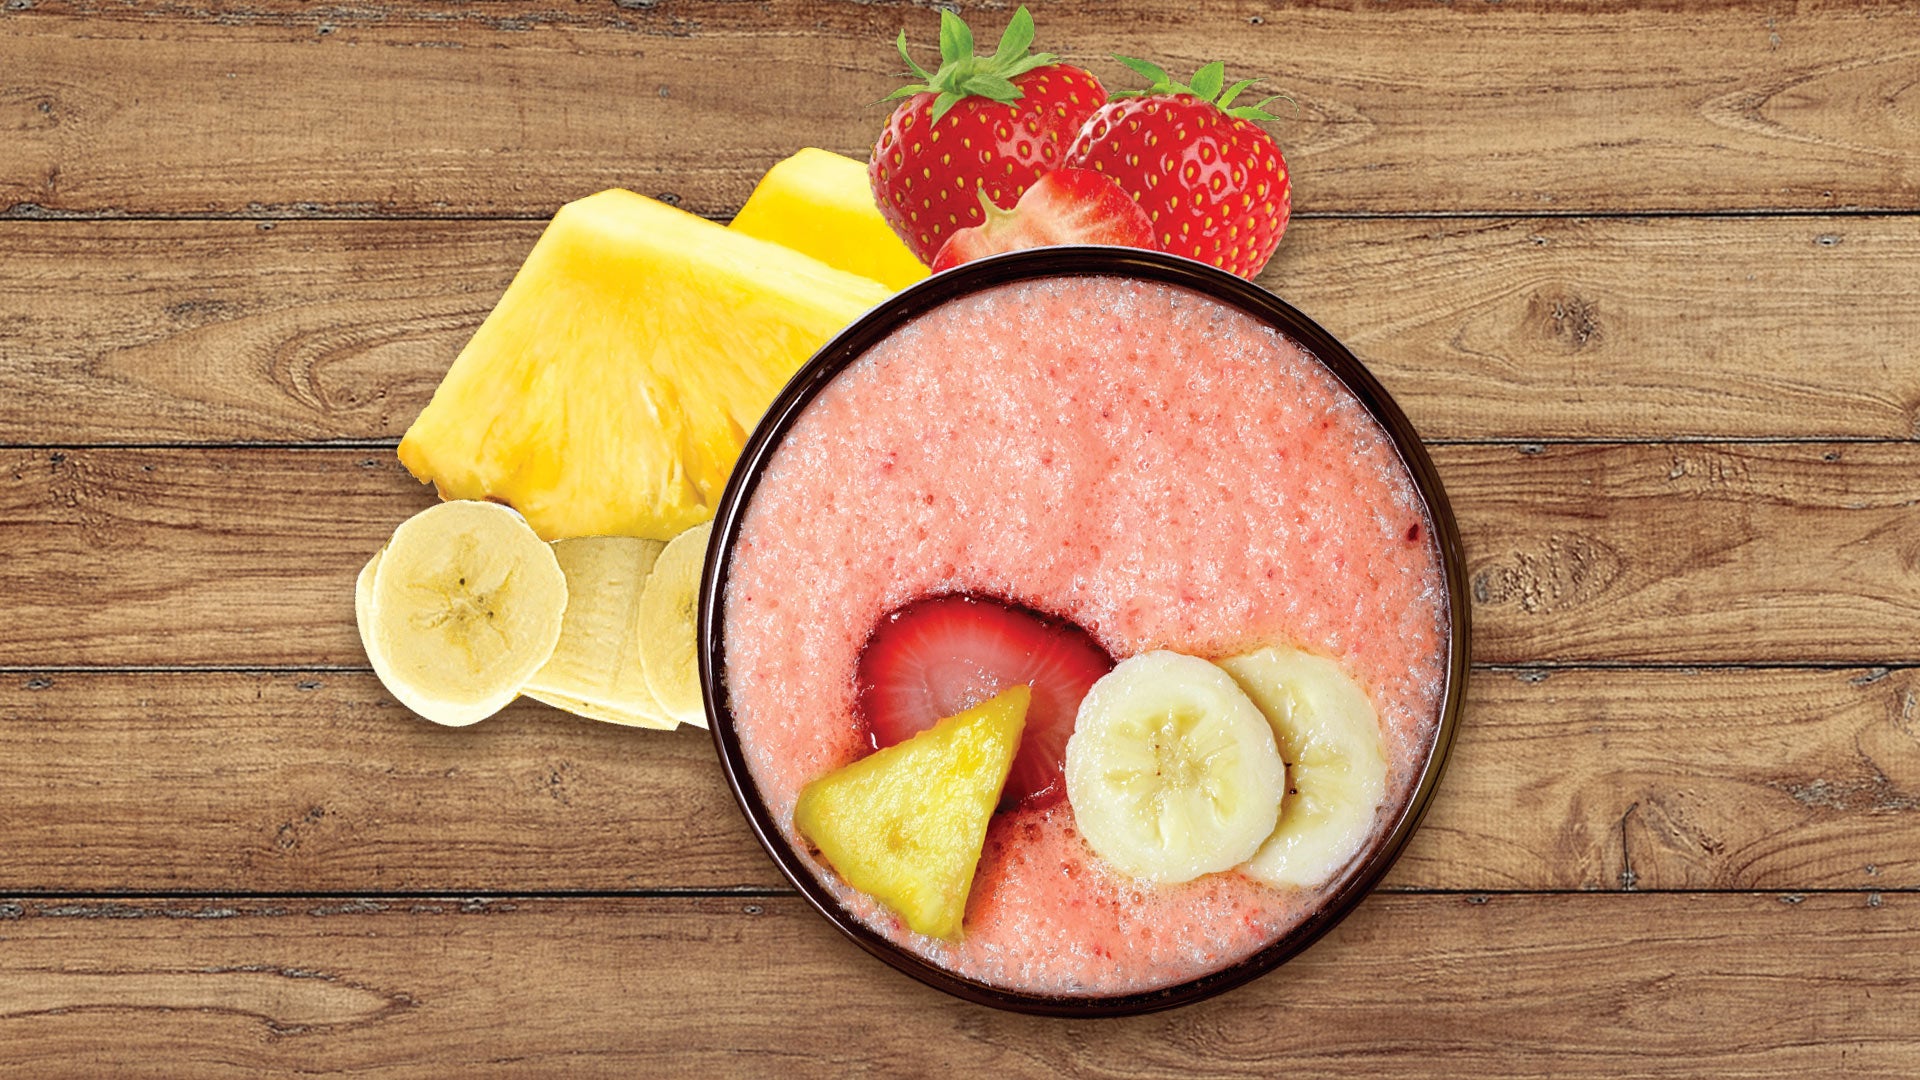 Strawberry Smoothie with Pineapple